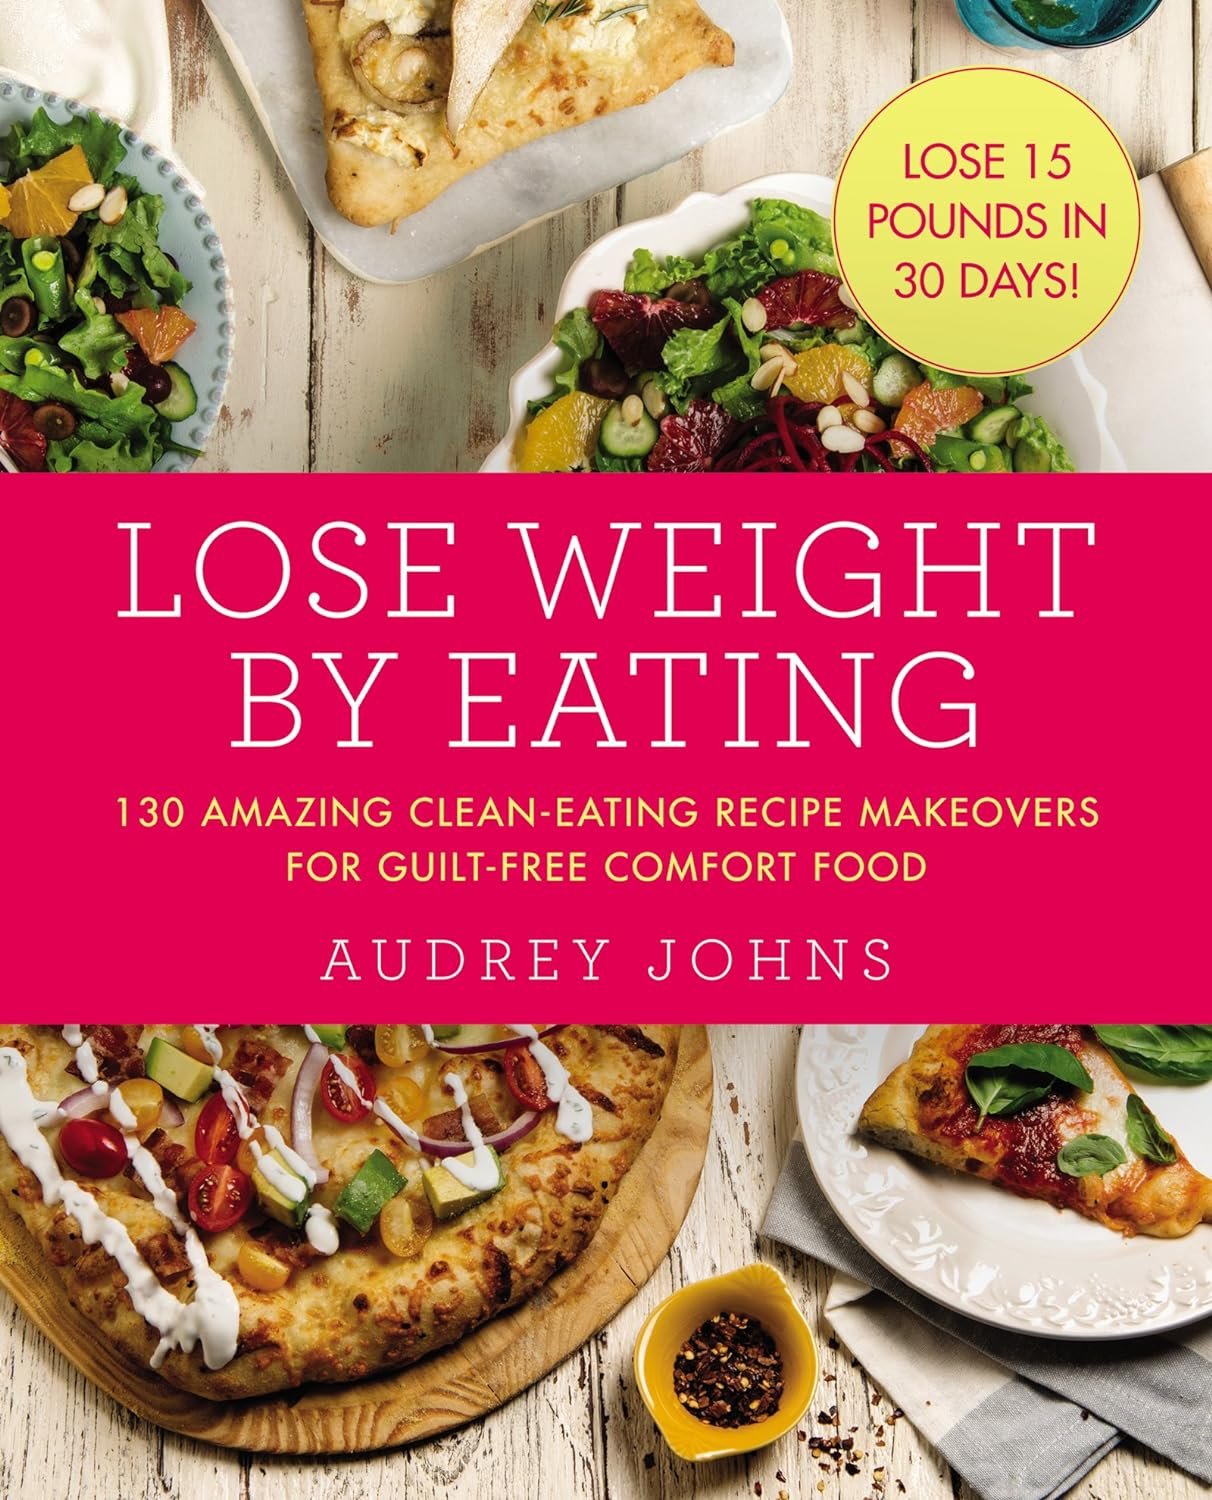 Lose Weight by Eating: 130 Amazing Clean-Eating Makeovers for Guilt-Free Comfort Food (Lose Weight By Eating, 4)